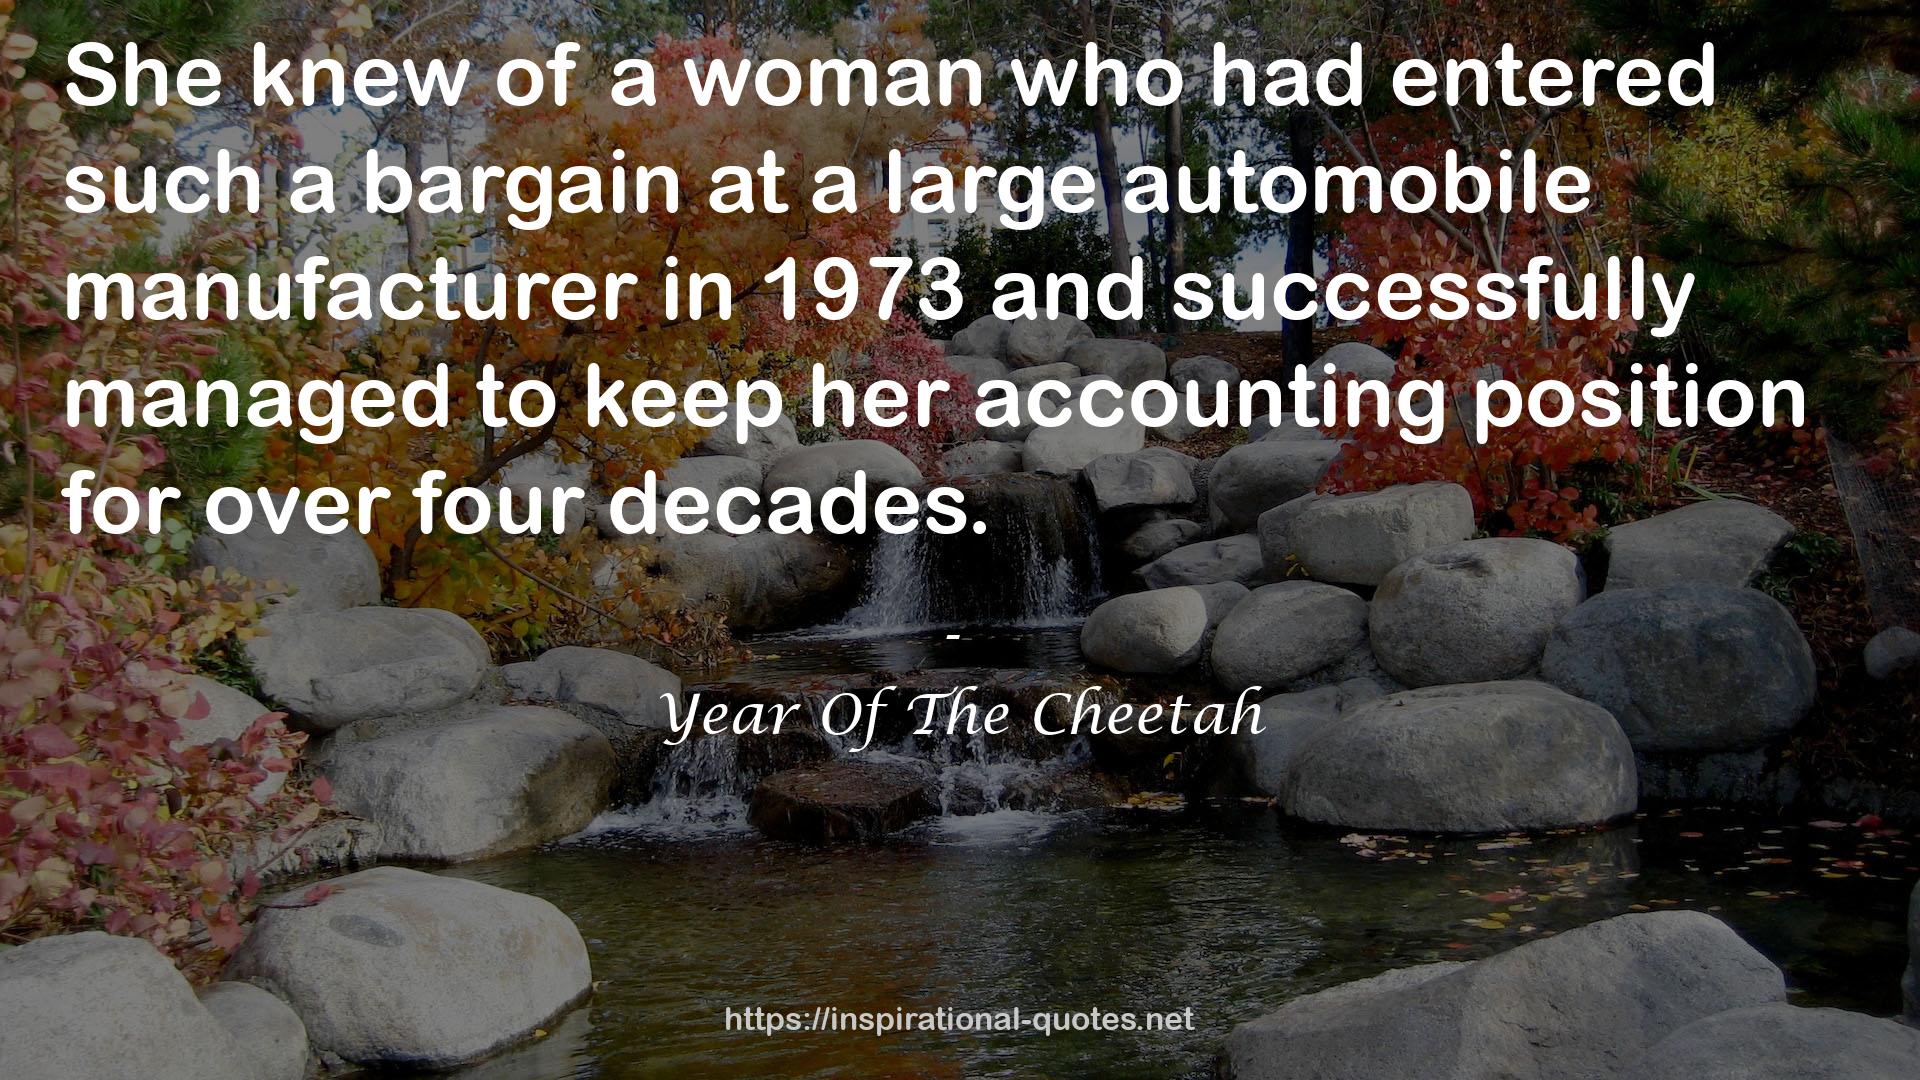 Year Of The Cheetah QUOTES